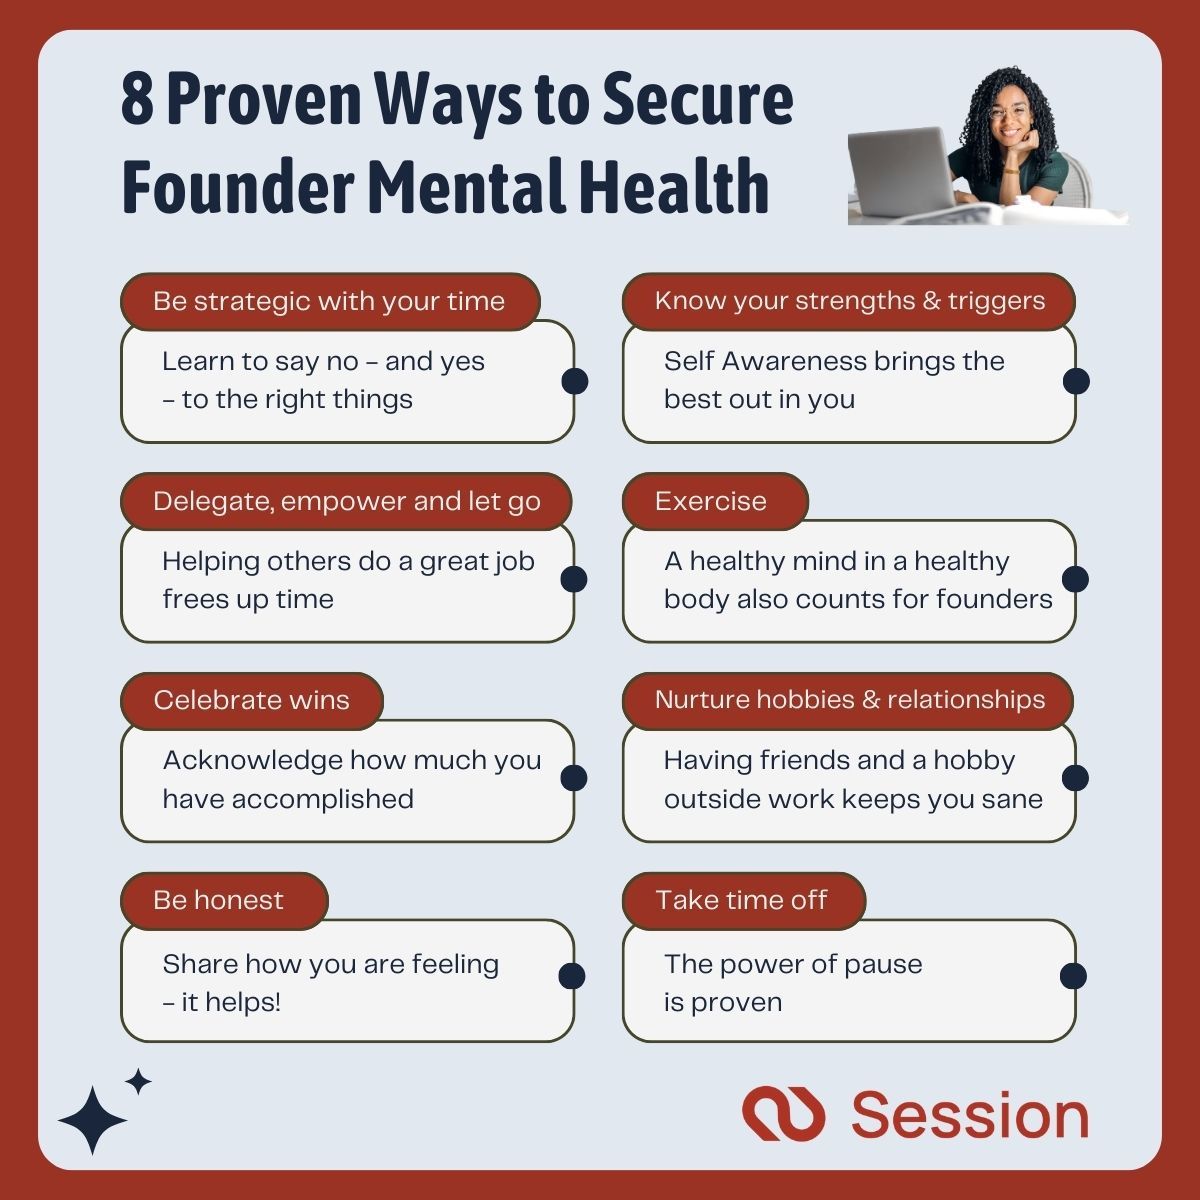 Illustration of 8 Proven Ways to Secure Founder Mental Health